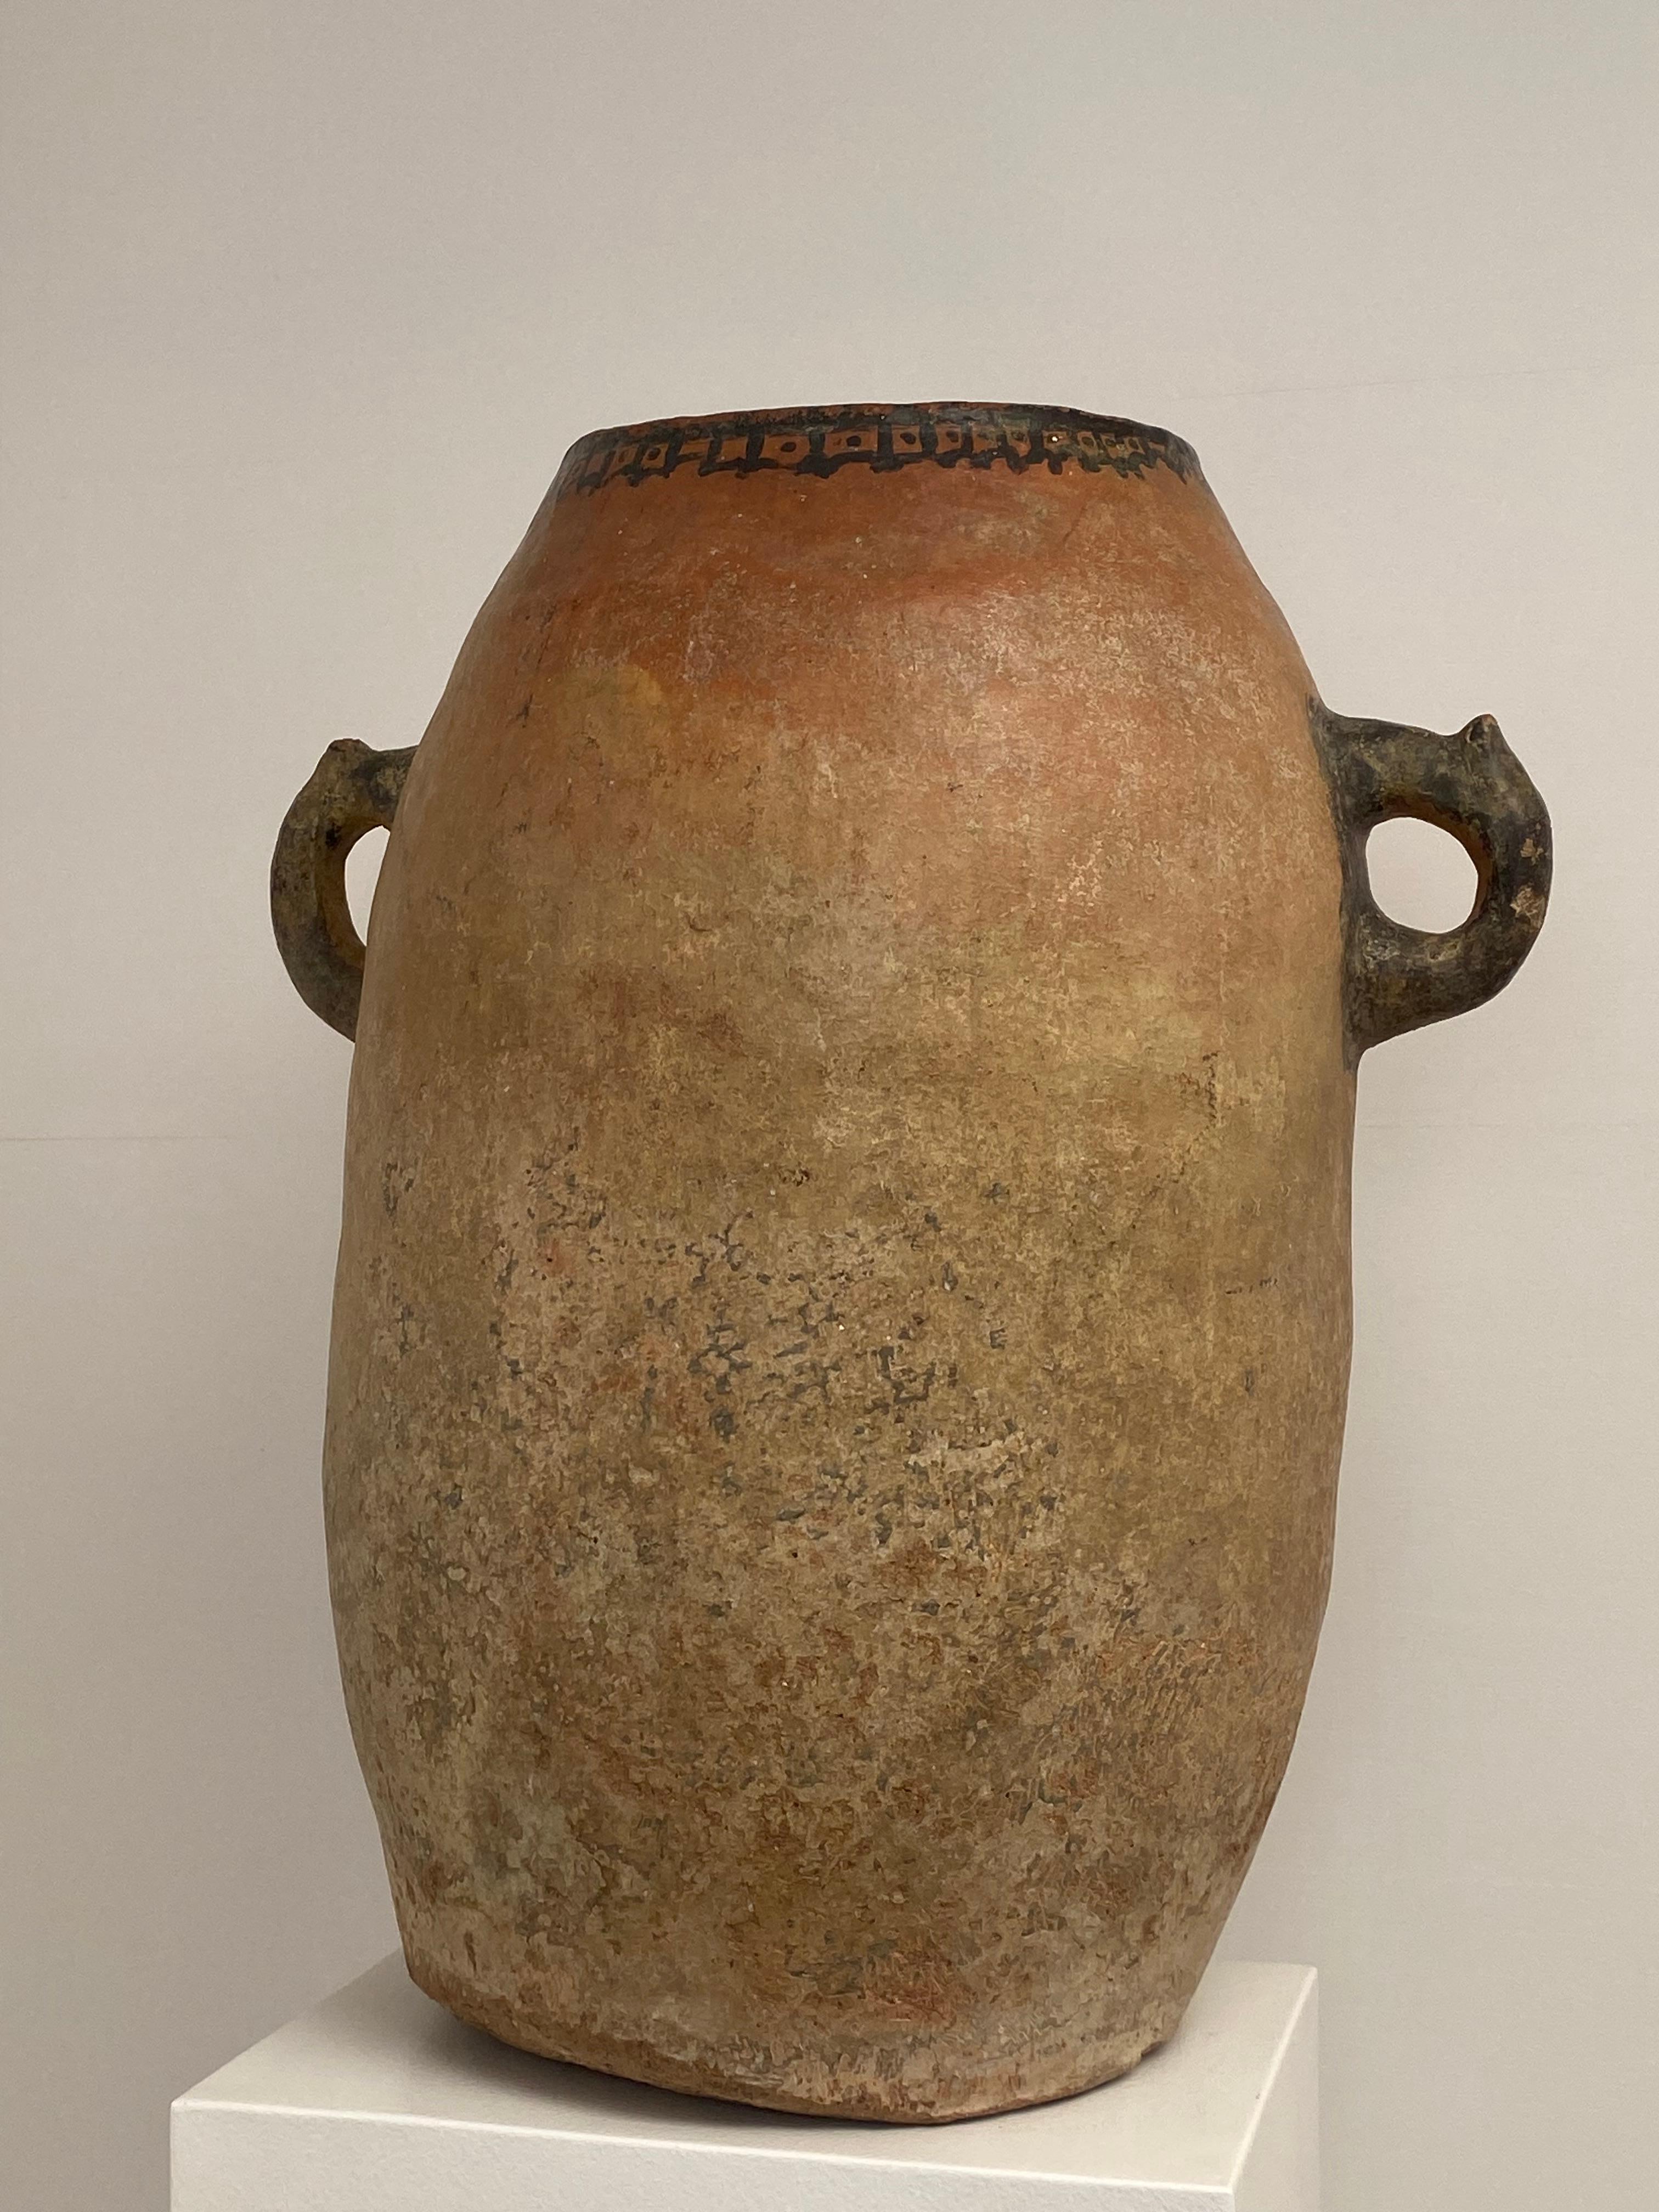 Tall Terracotta Vase from Morocco, Berber origin, early 19 th Century,
the vase has a very beautiful Patina, nice Beige-Brown color and shine,
the urn is a little decorated a the top,
very decorative object 